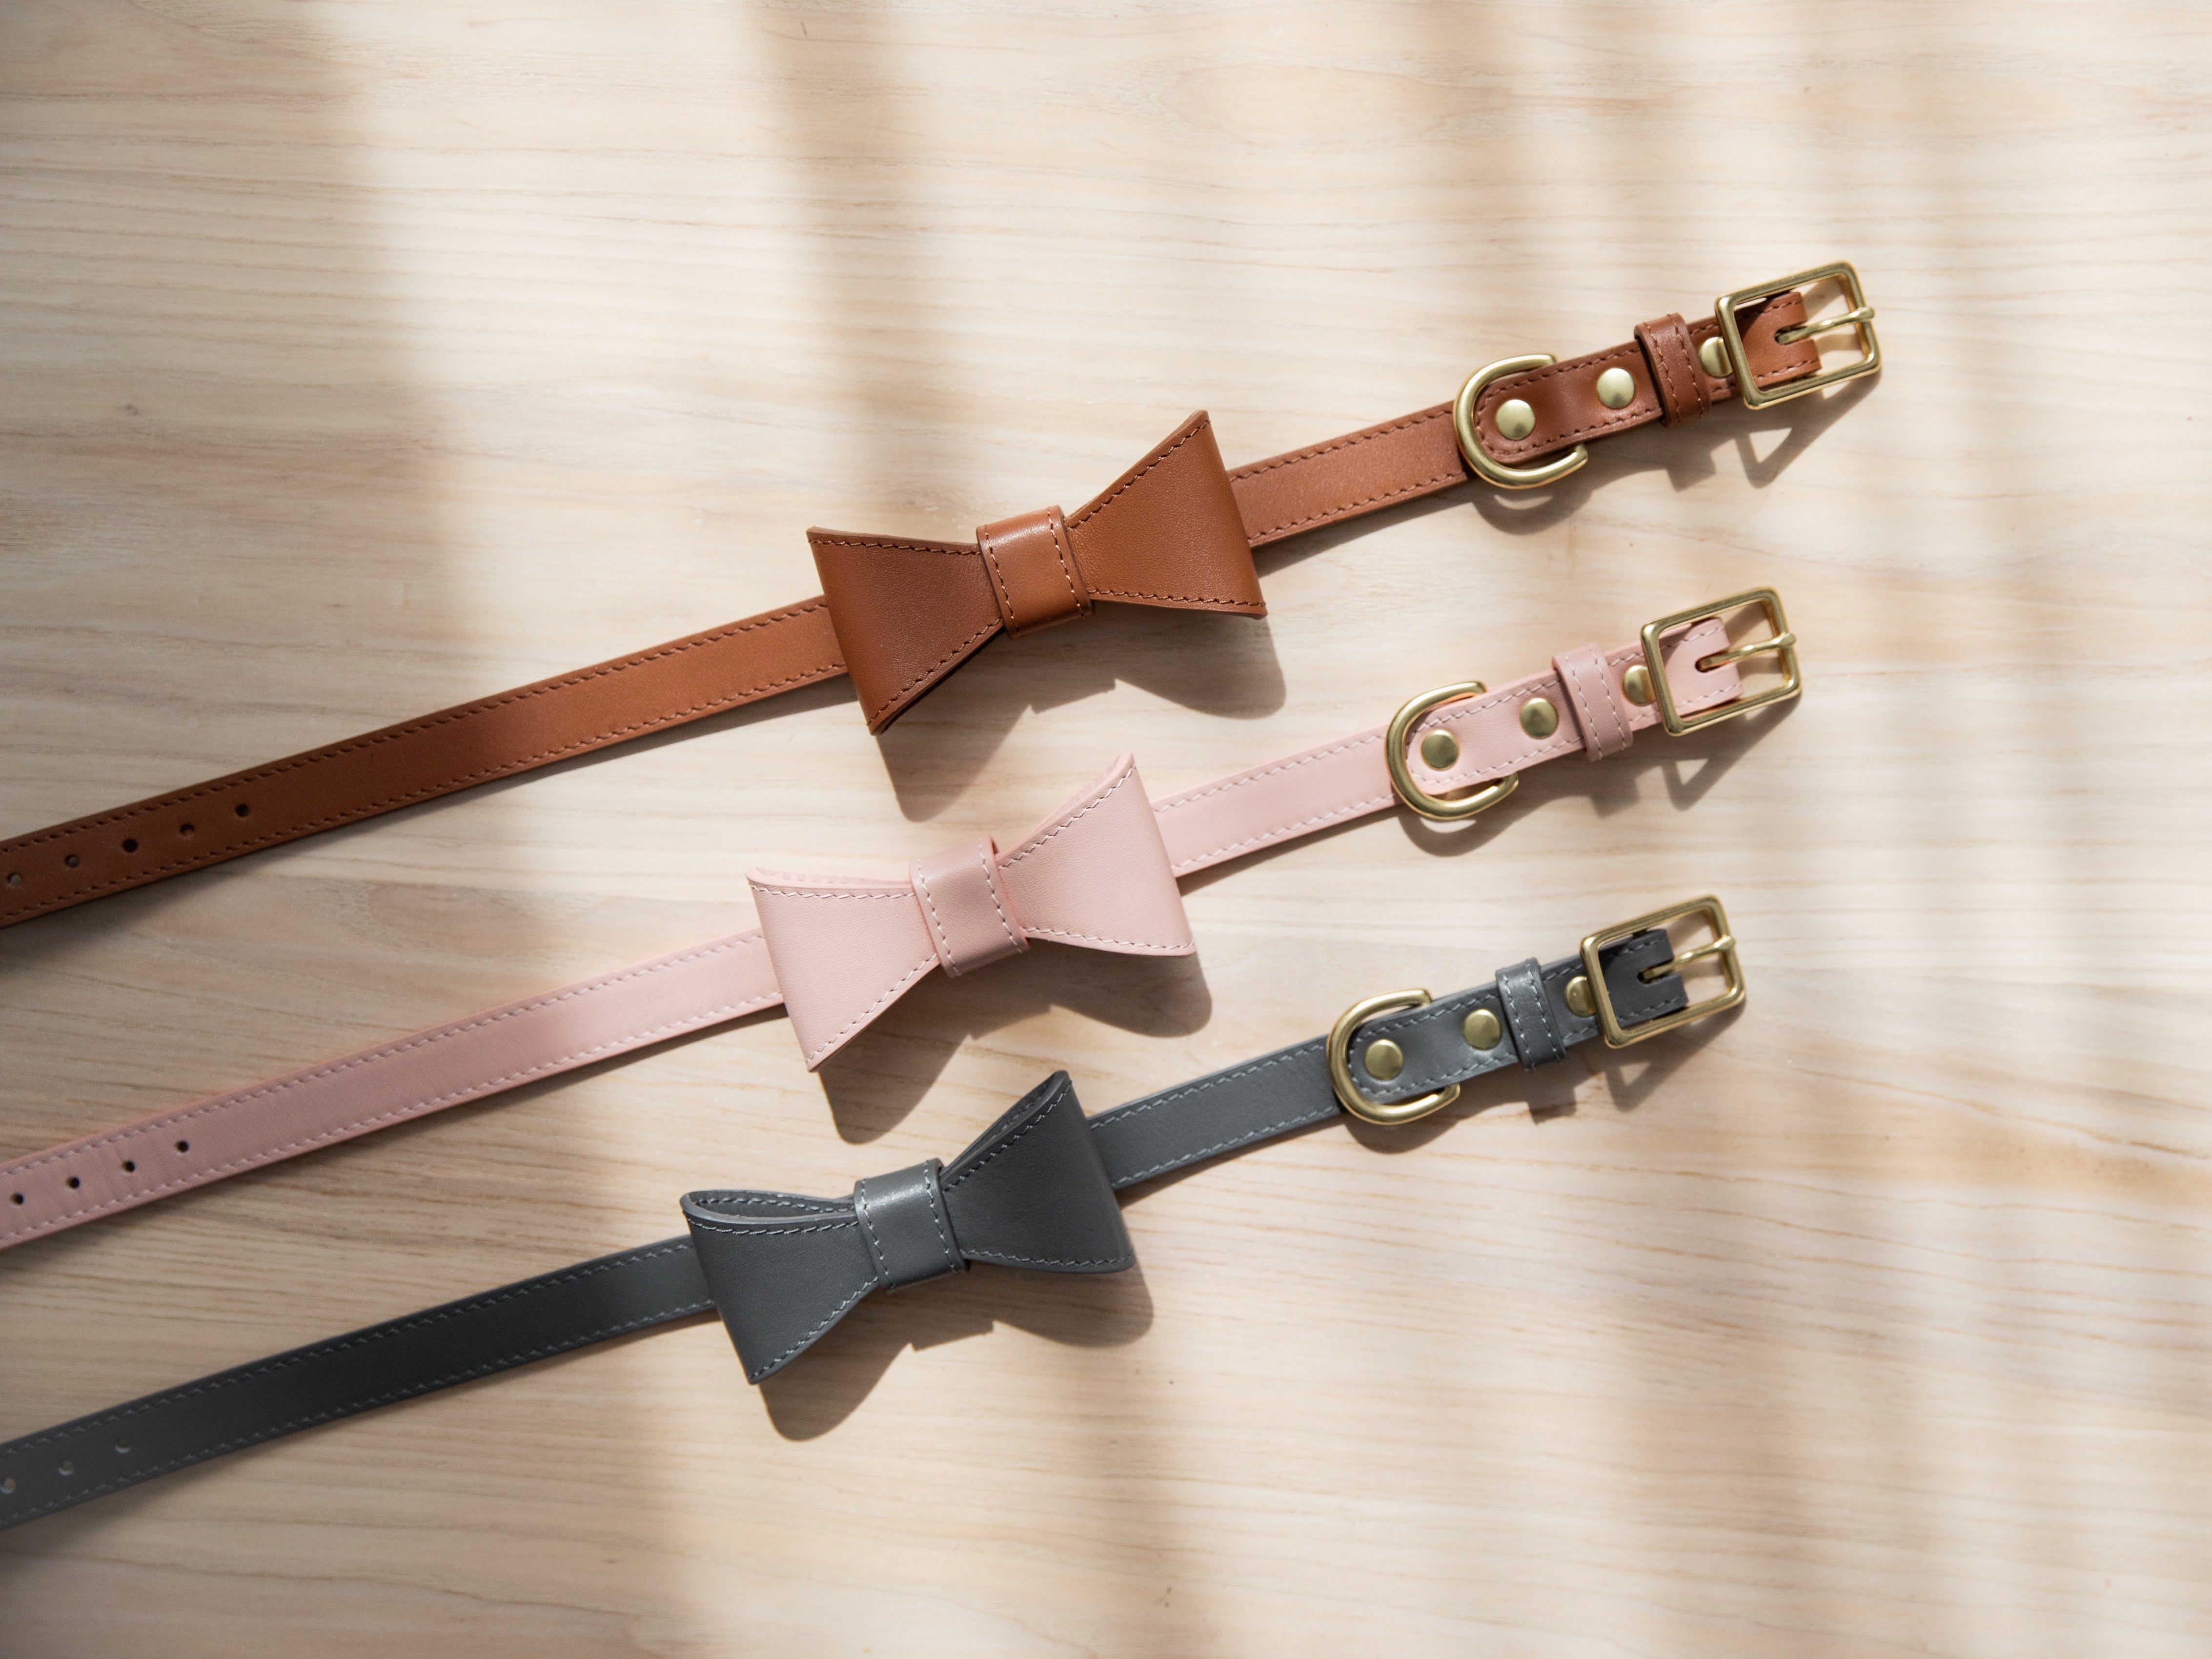 Blush pink leather collar with removable bow